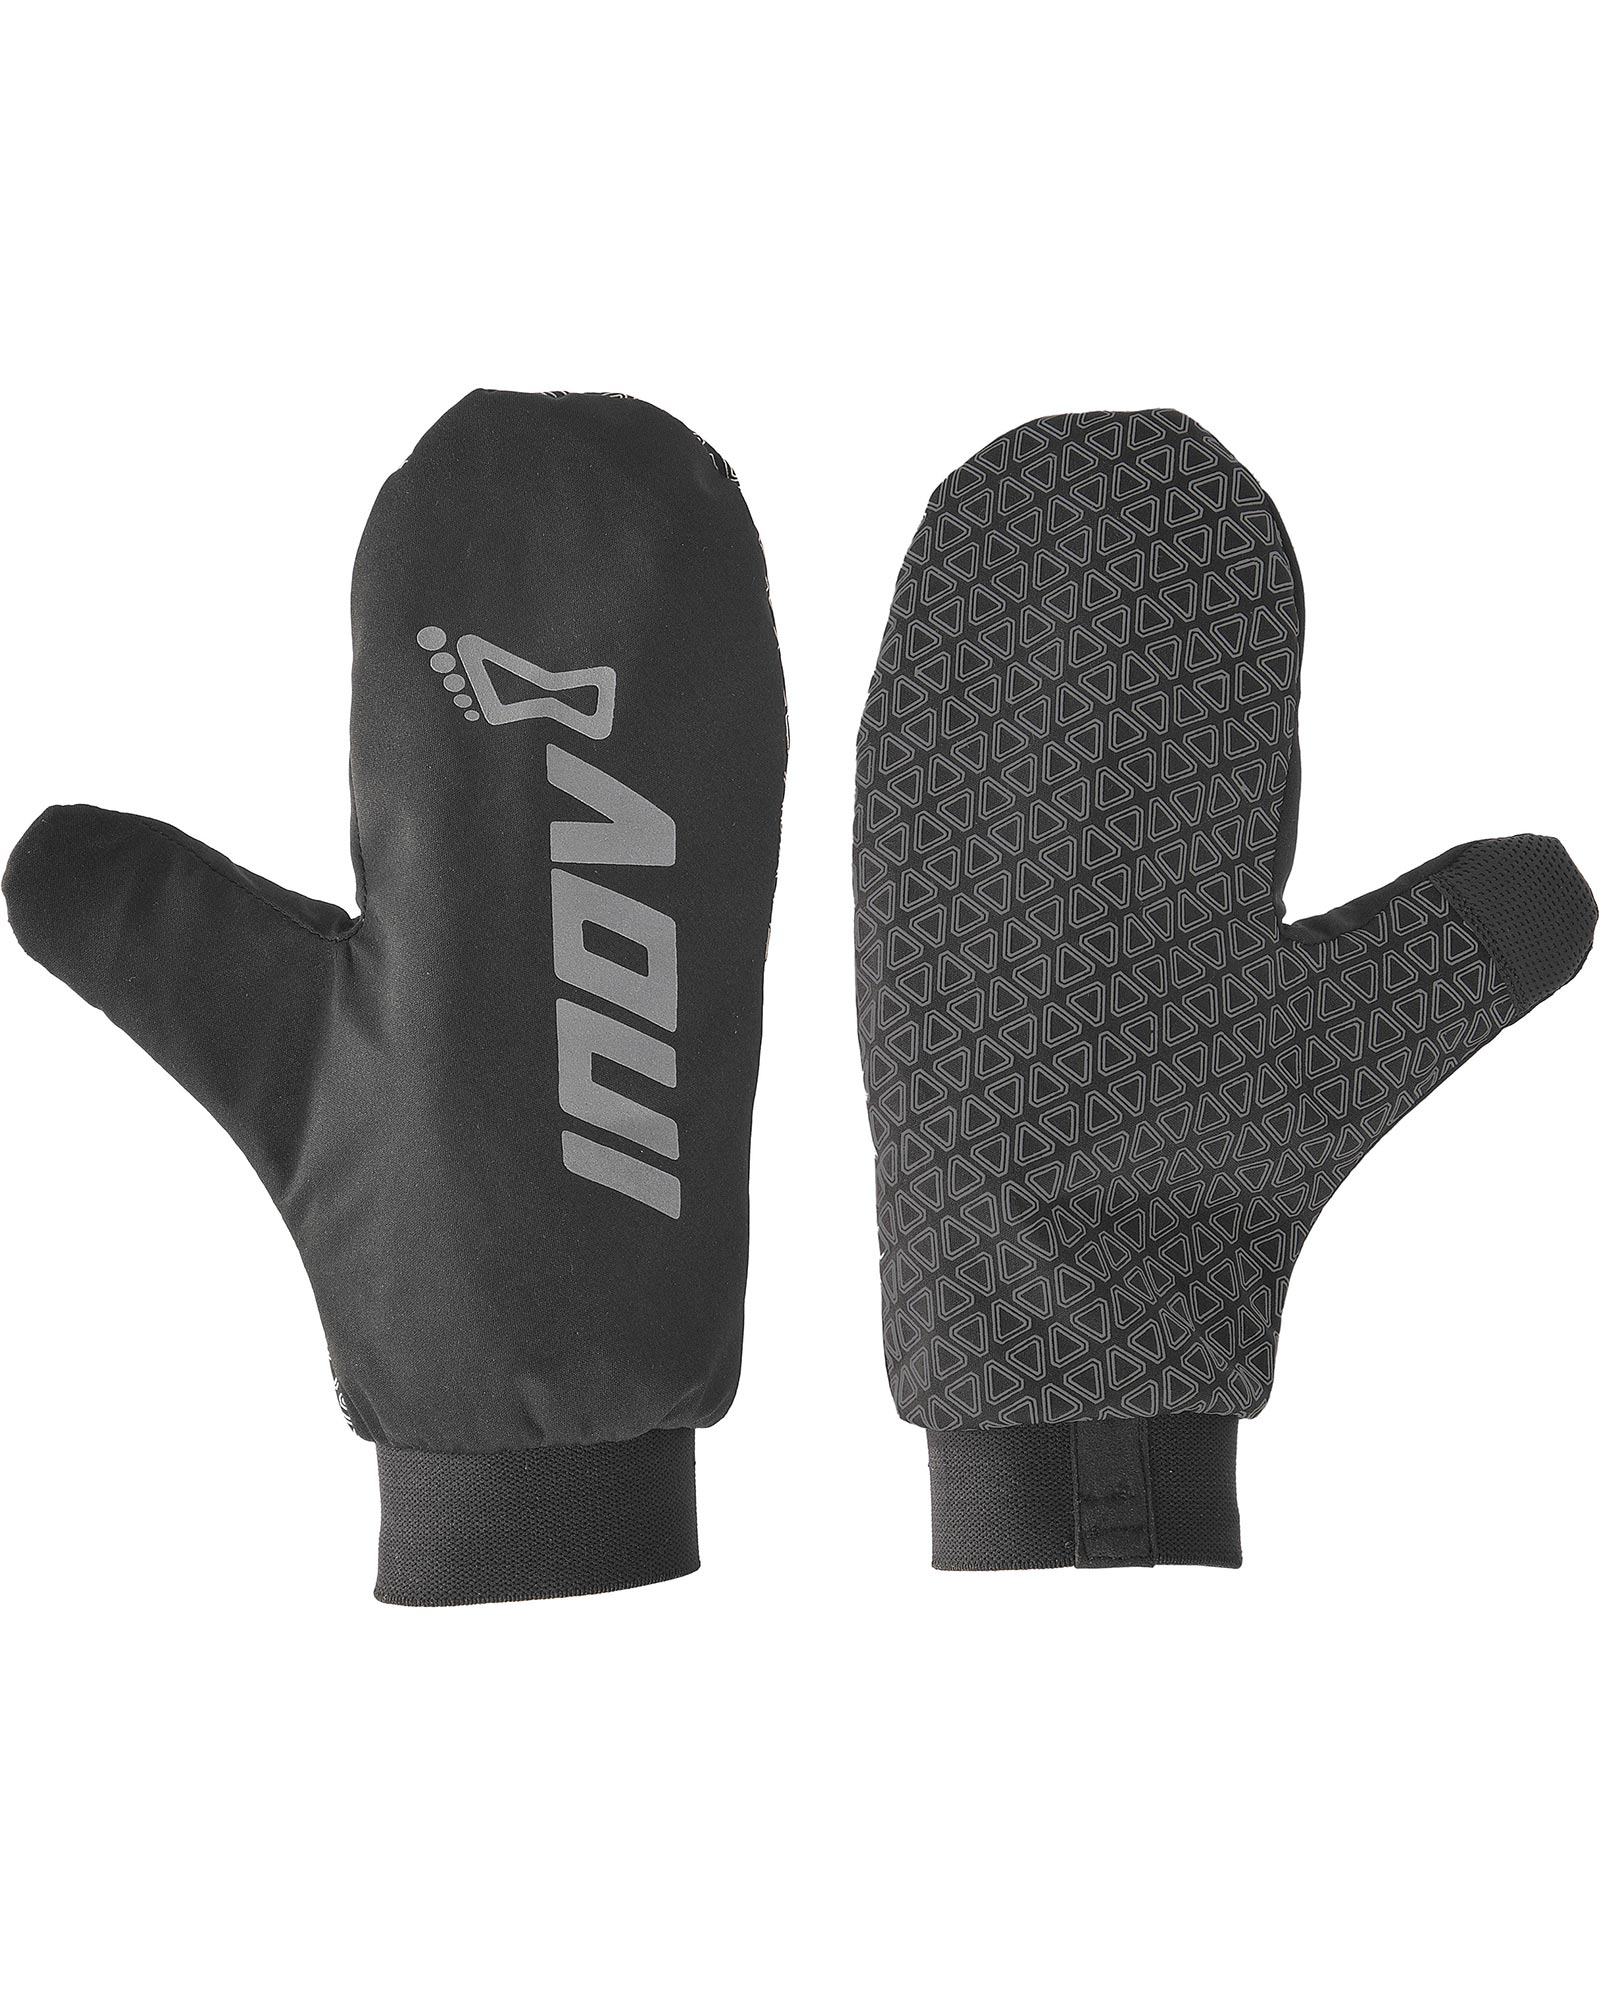 Inov-8 Extreme Thermo Mittens